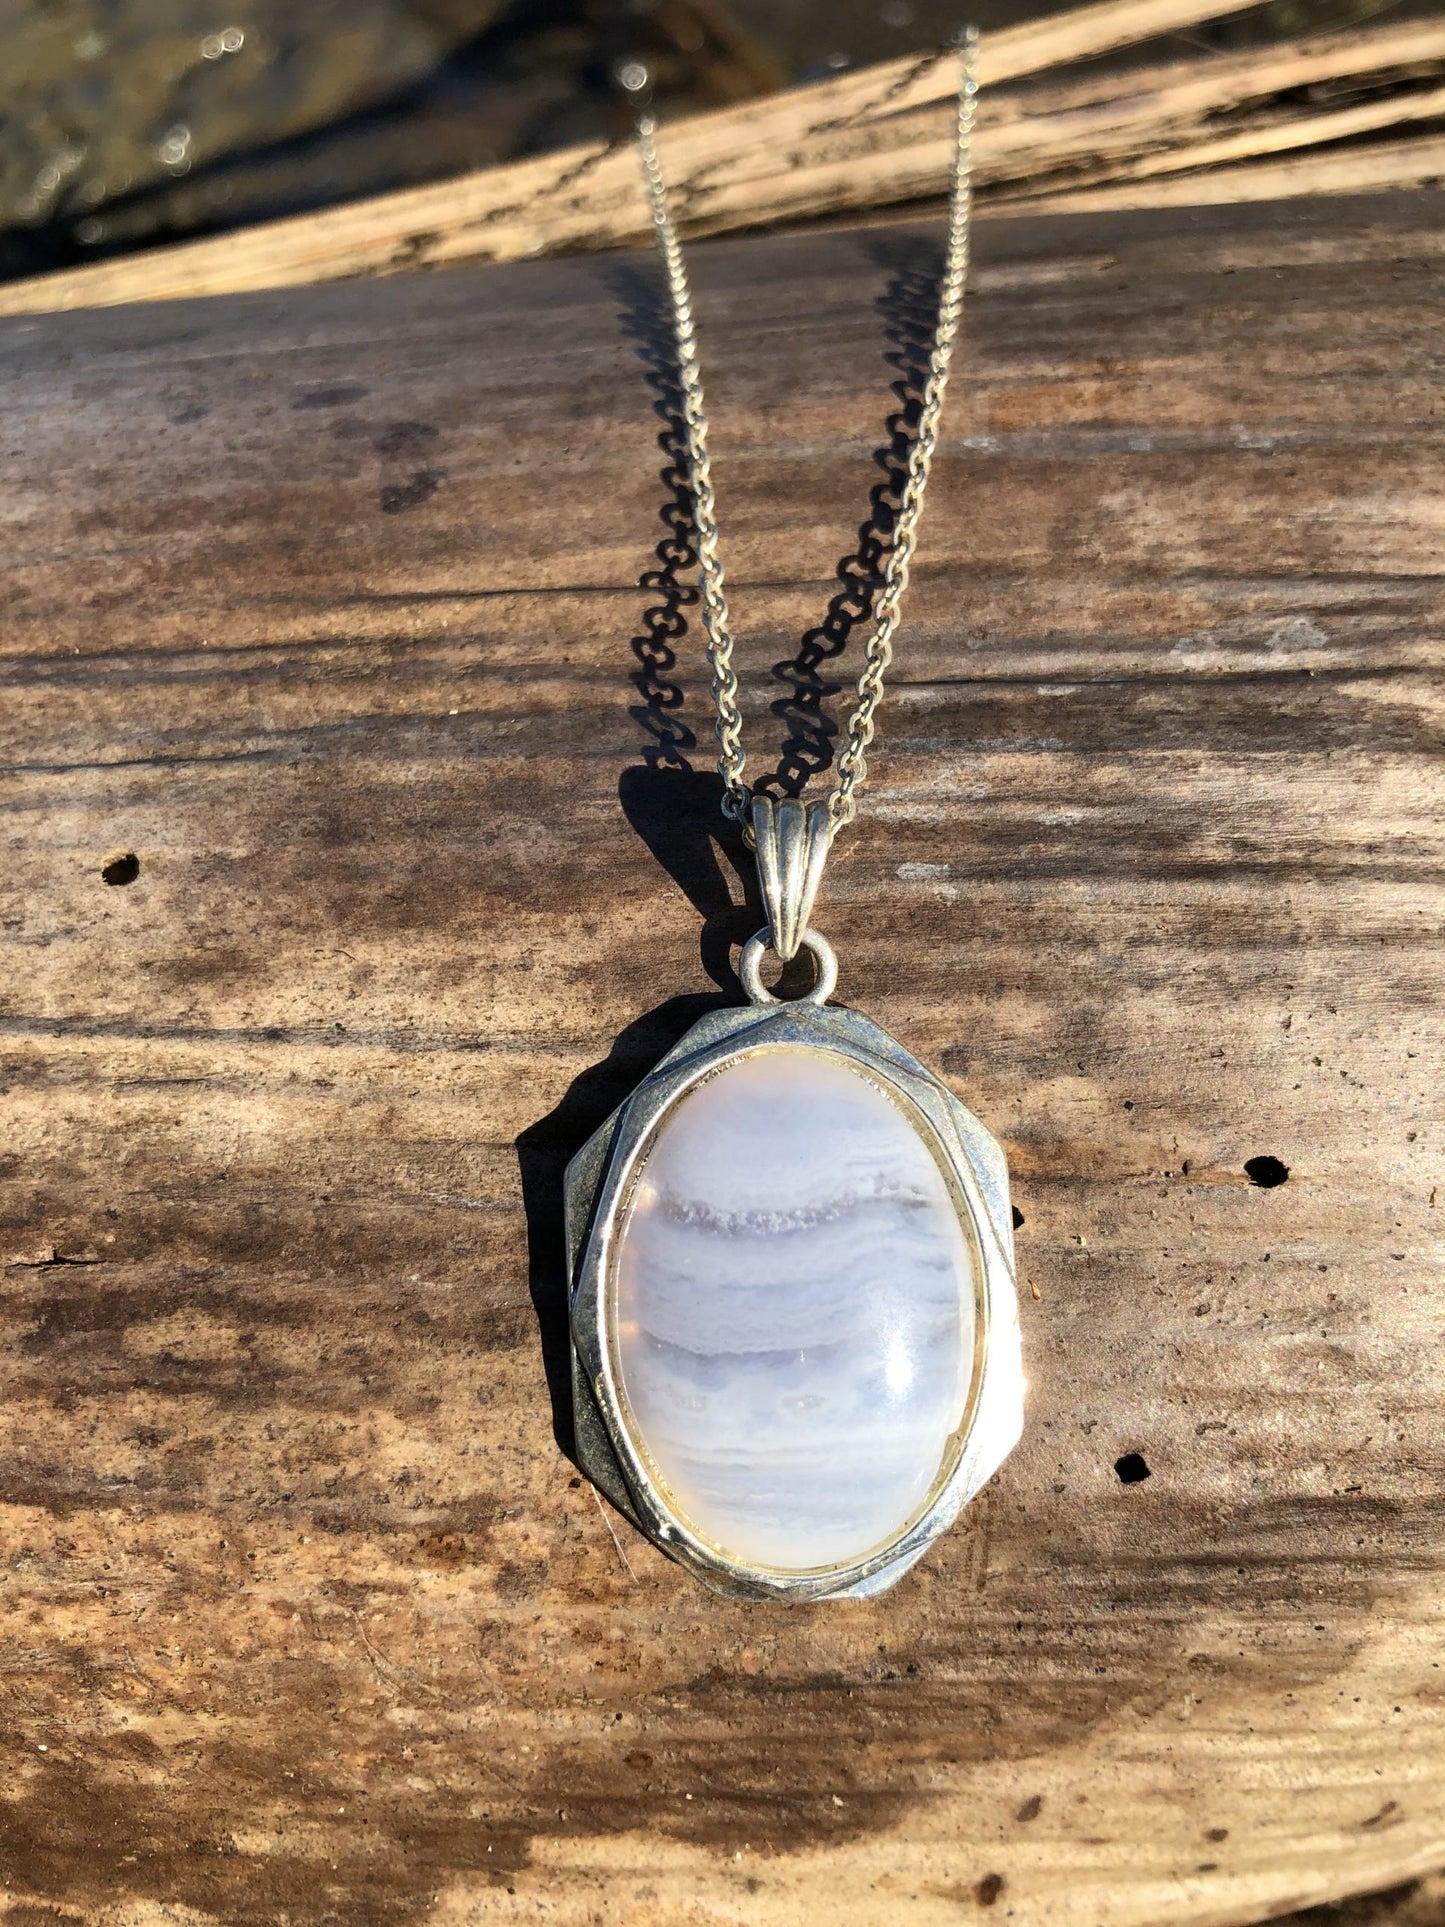 Necklace of Namibian Blue Lace Agate, with delicate blue and white stripes, hand polished to a 25x18mm cabochon and set in silver plated setting with 19 inch chain, on wood